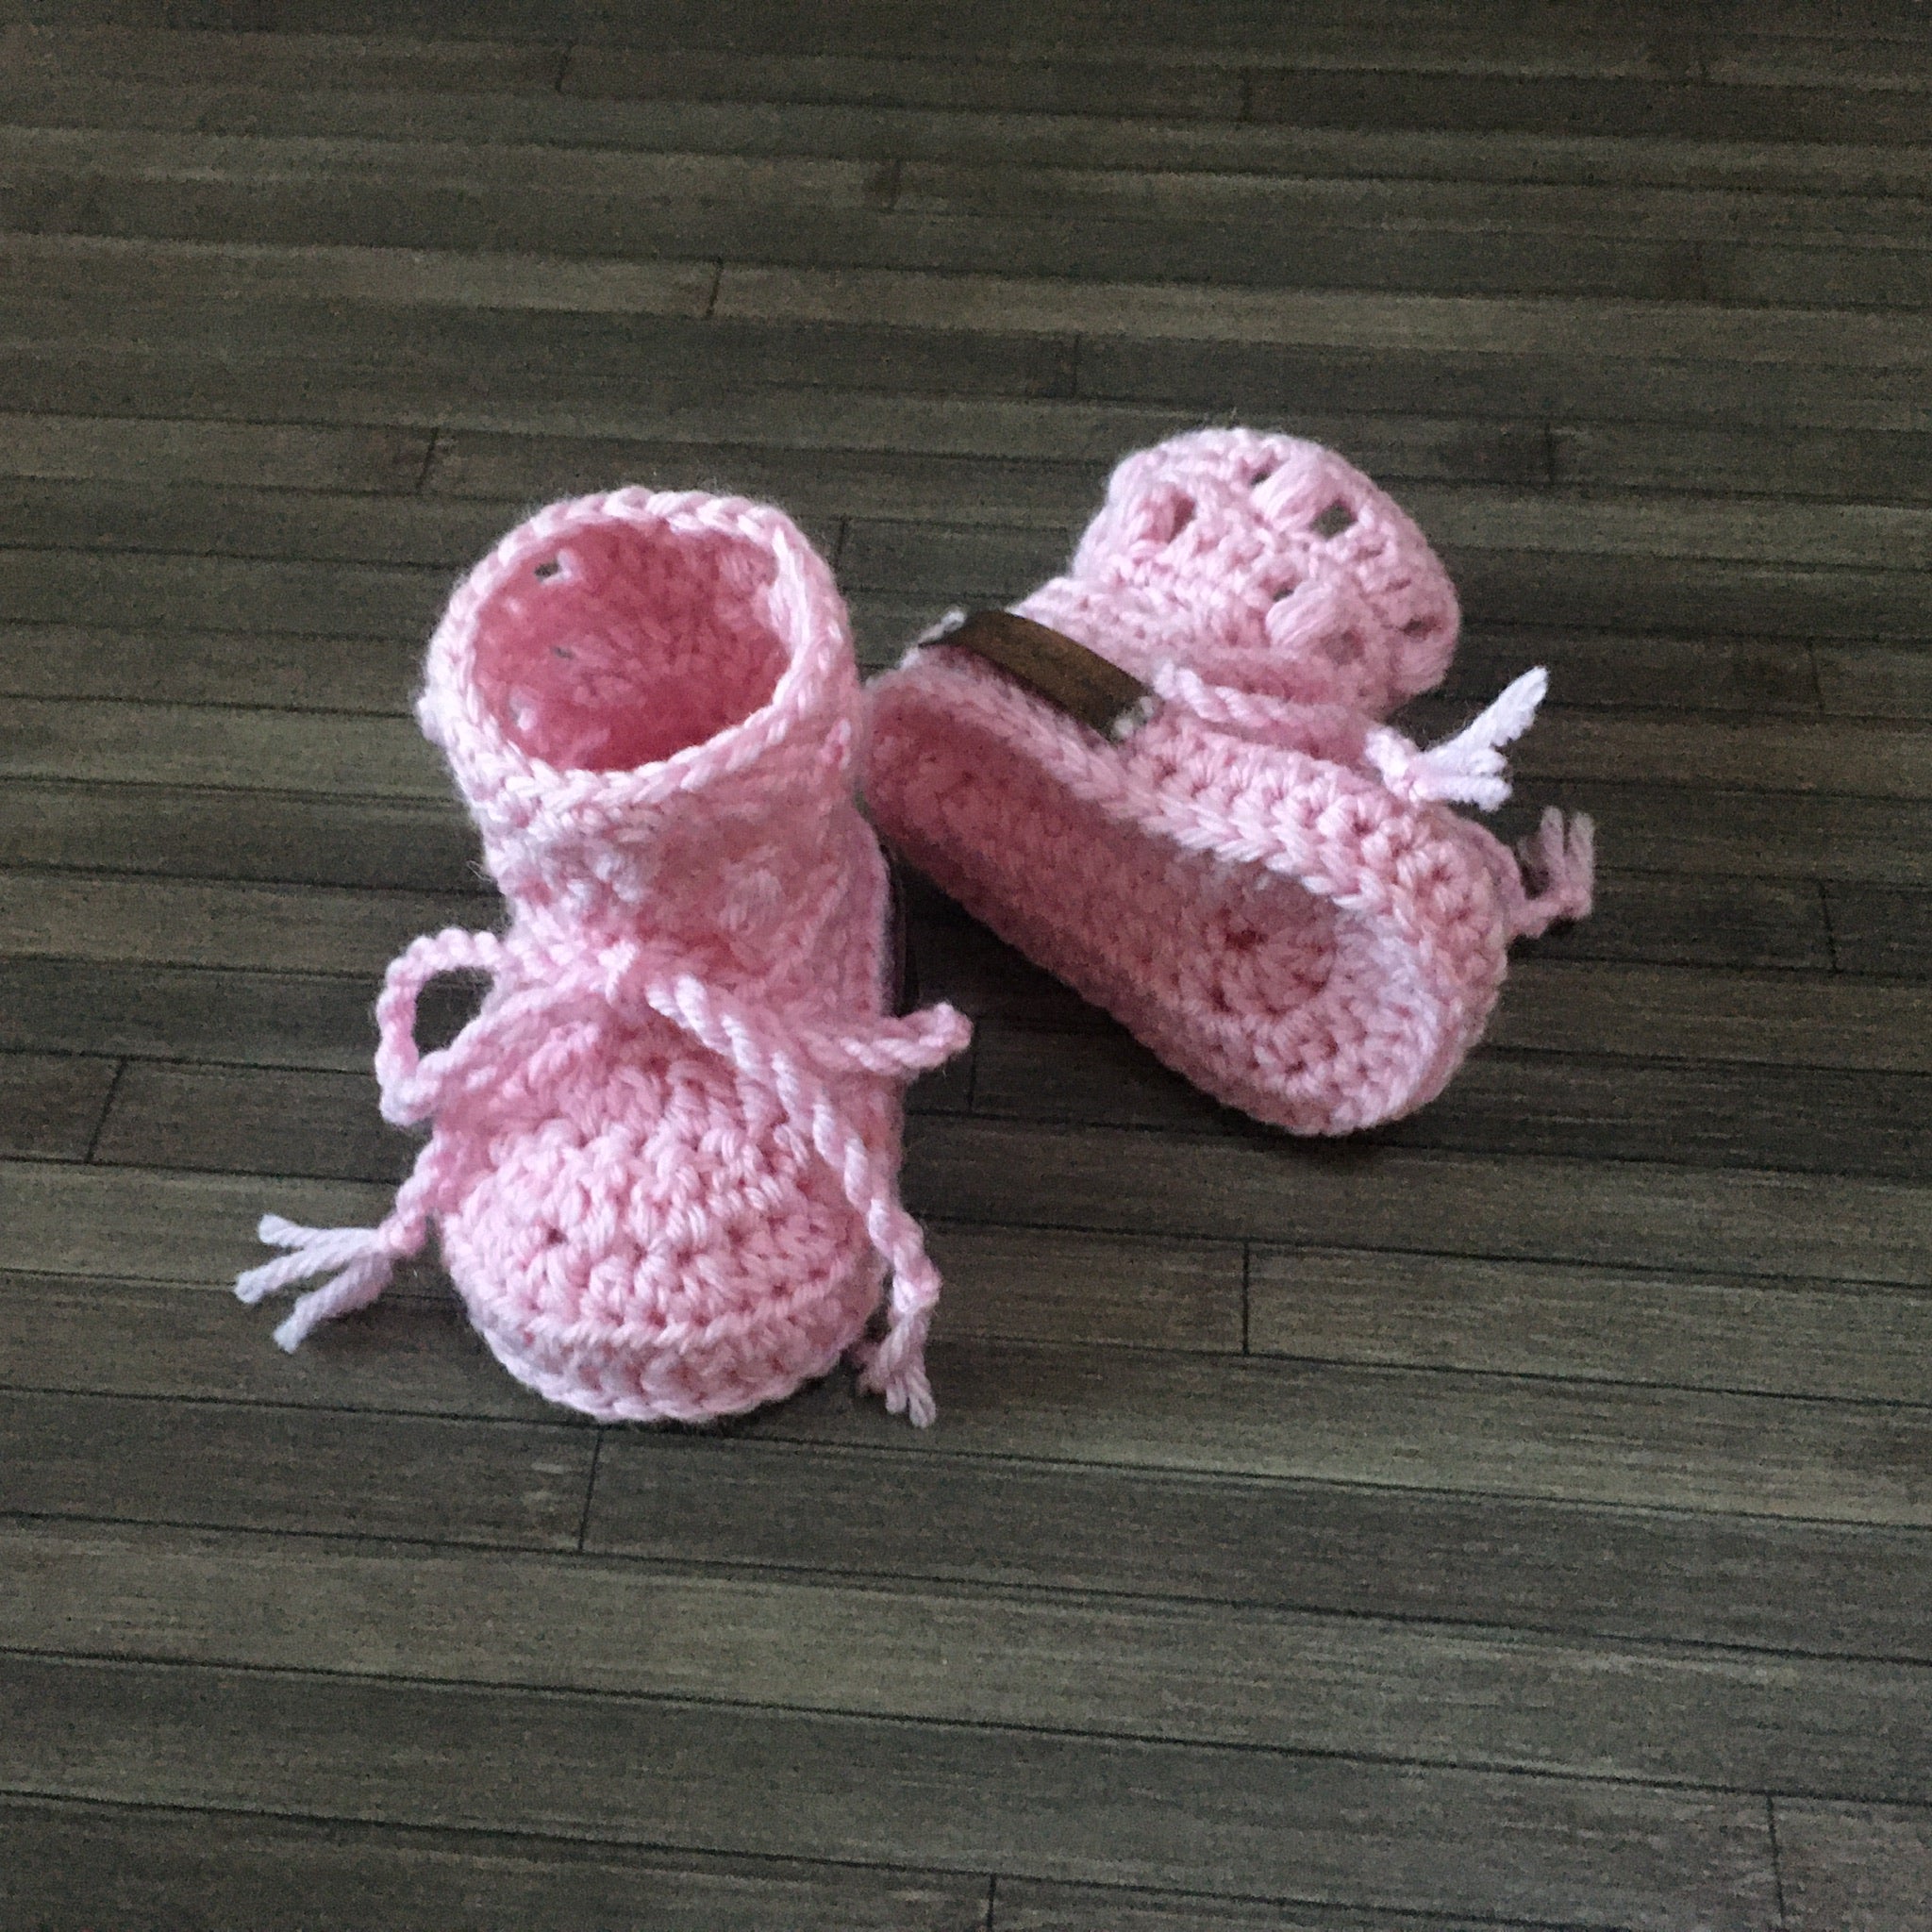 How to Crochet Nike Baby Sneakers with Free Pattern | Crochet baby shoes  pattern, Crochet baby shoes, Knit baby booties